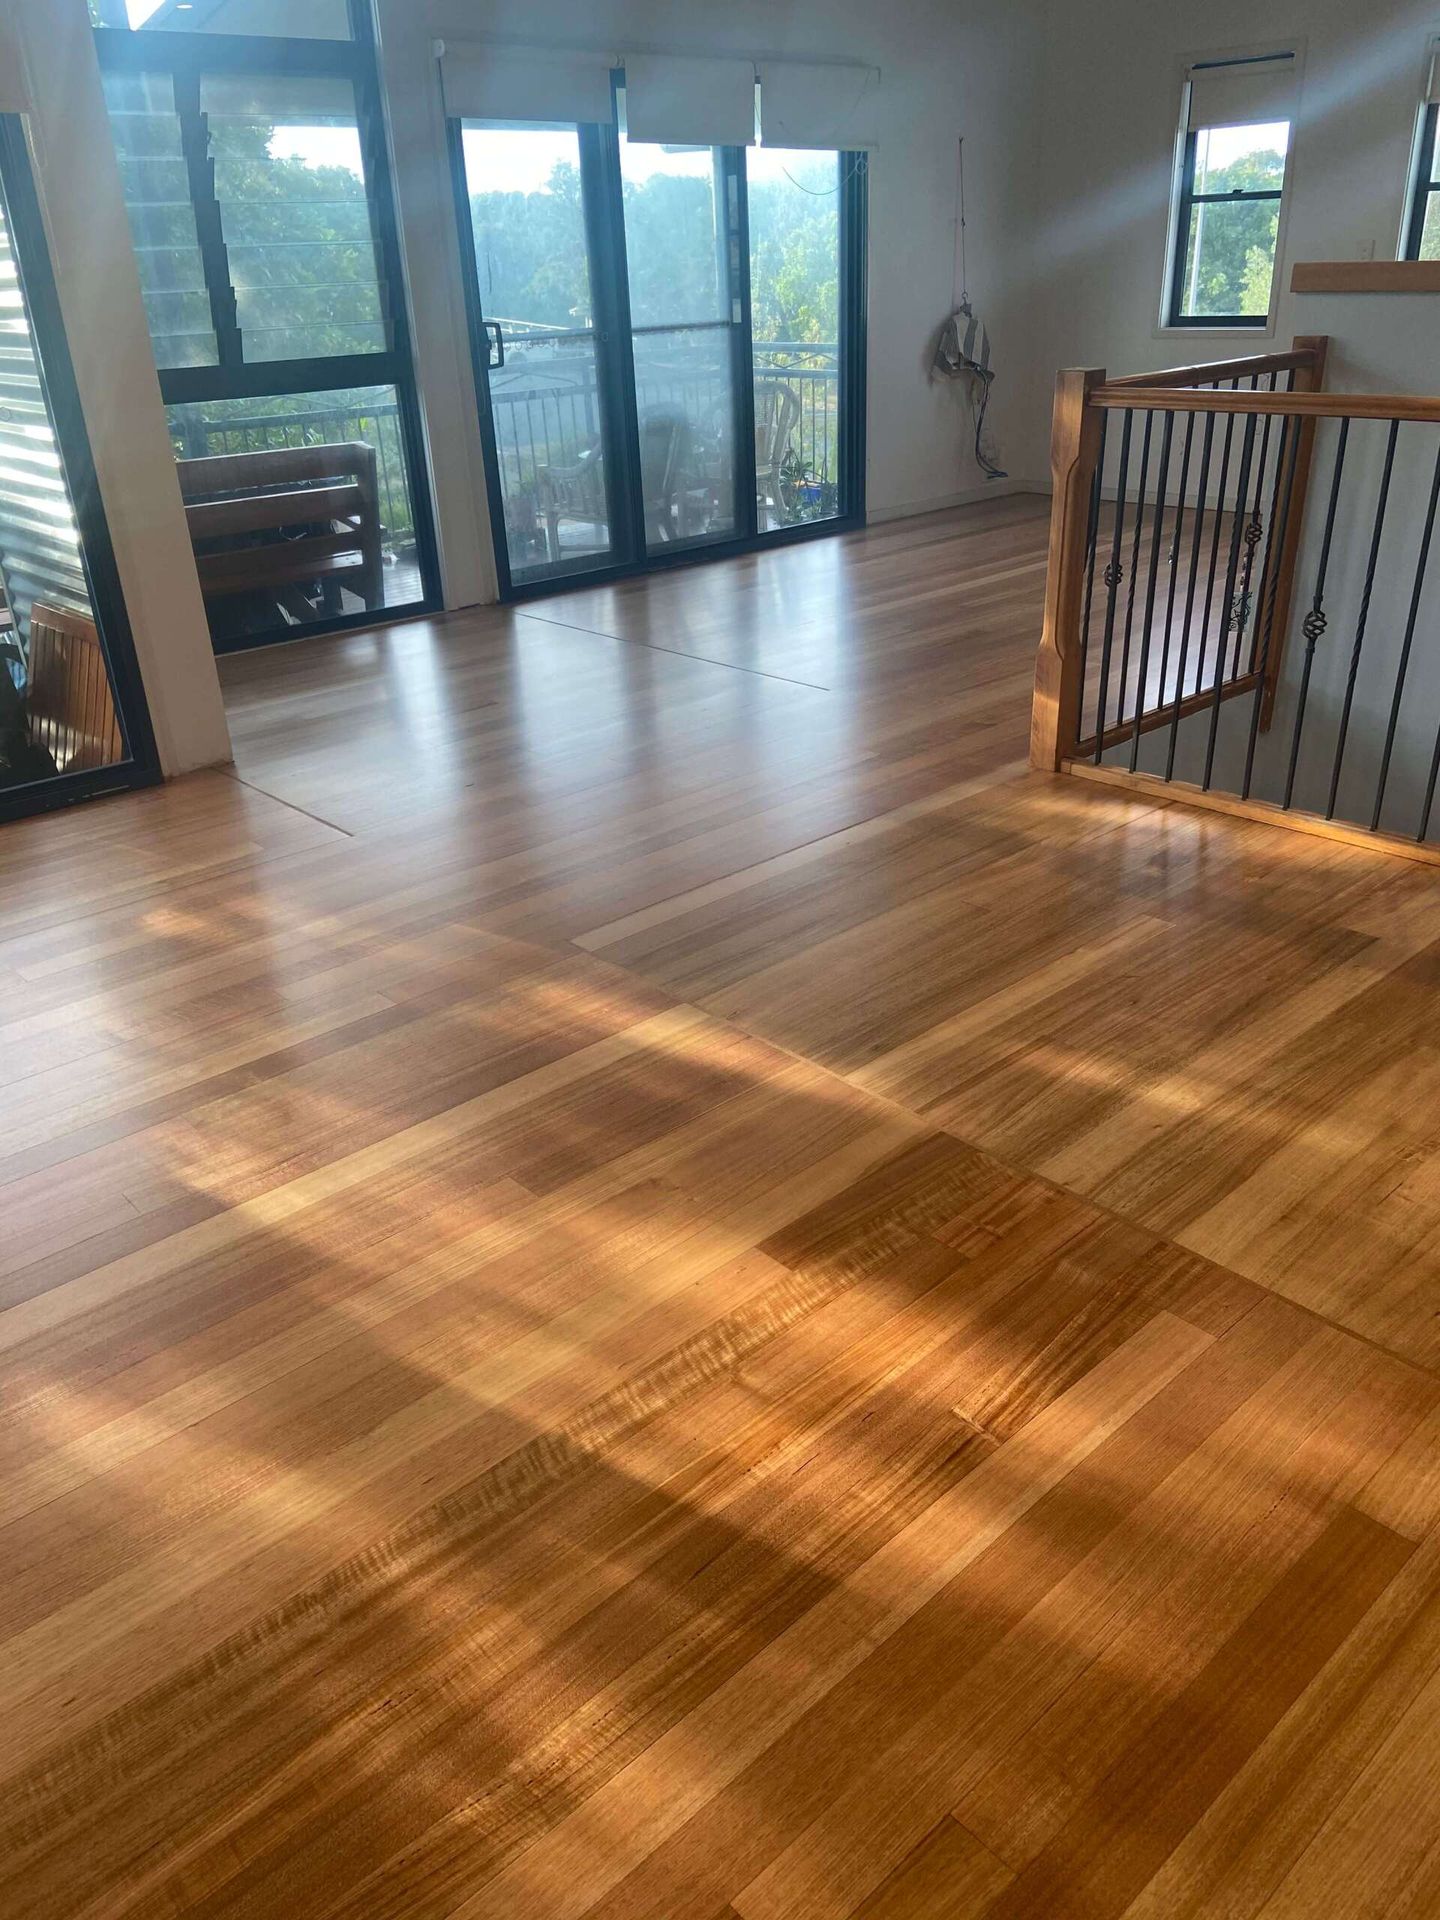 New Timber Cork Flooring — Dull Floors in Chinderah, NSW